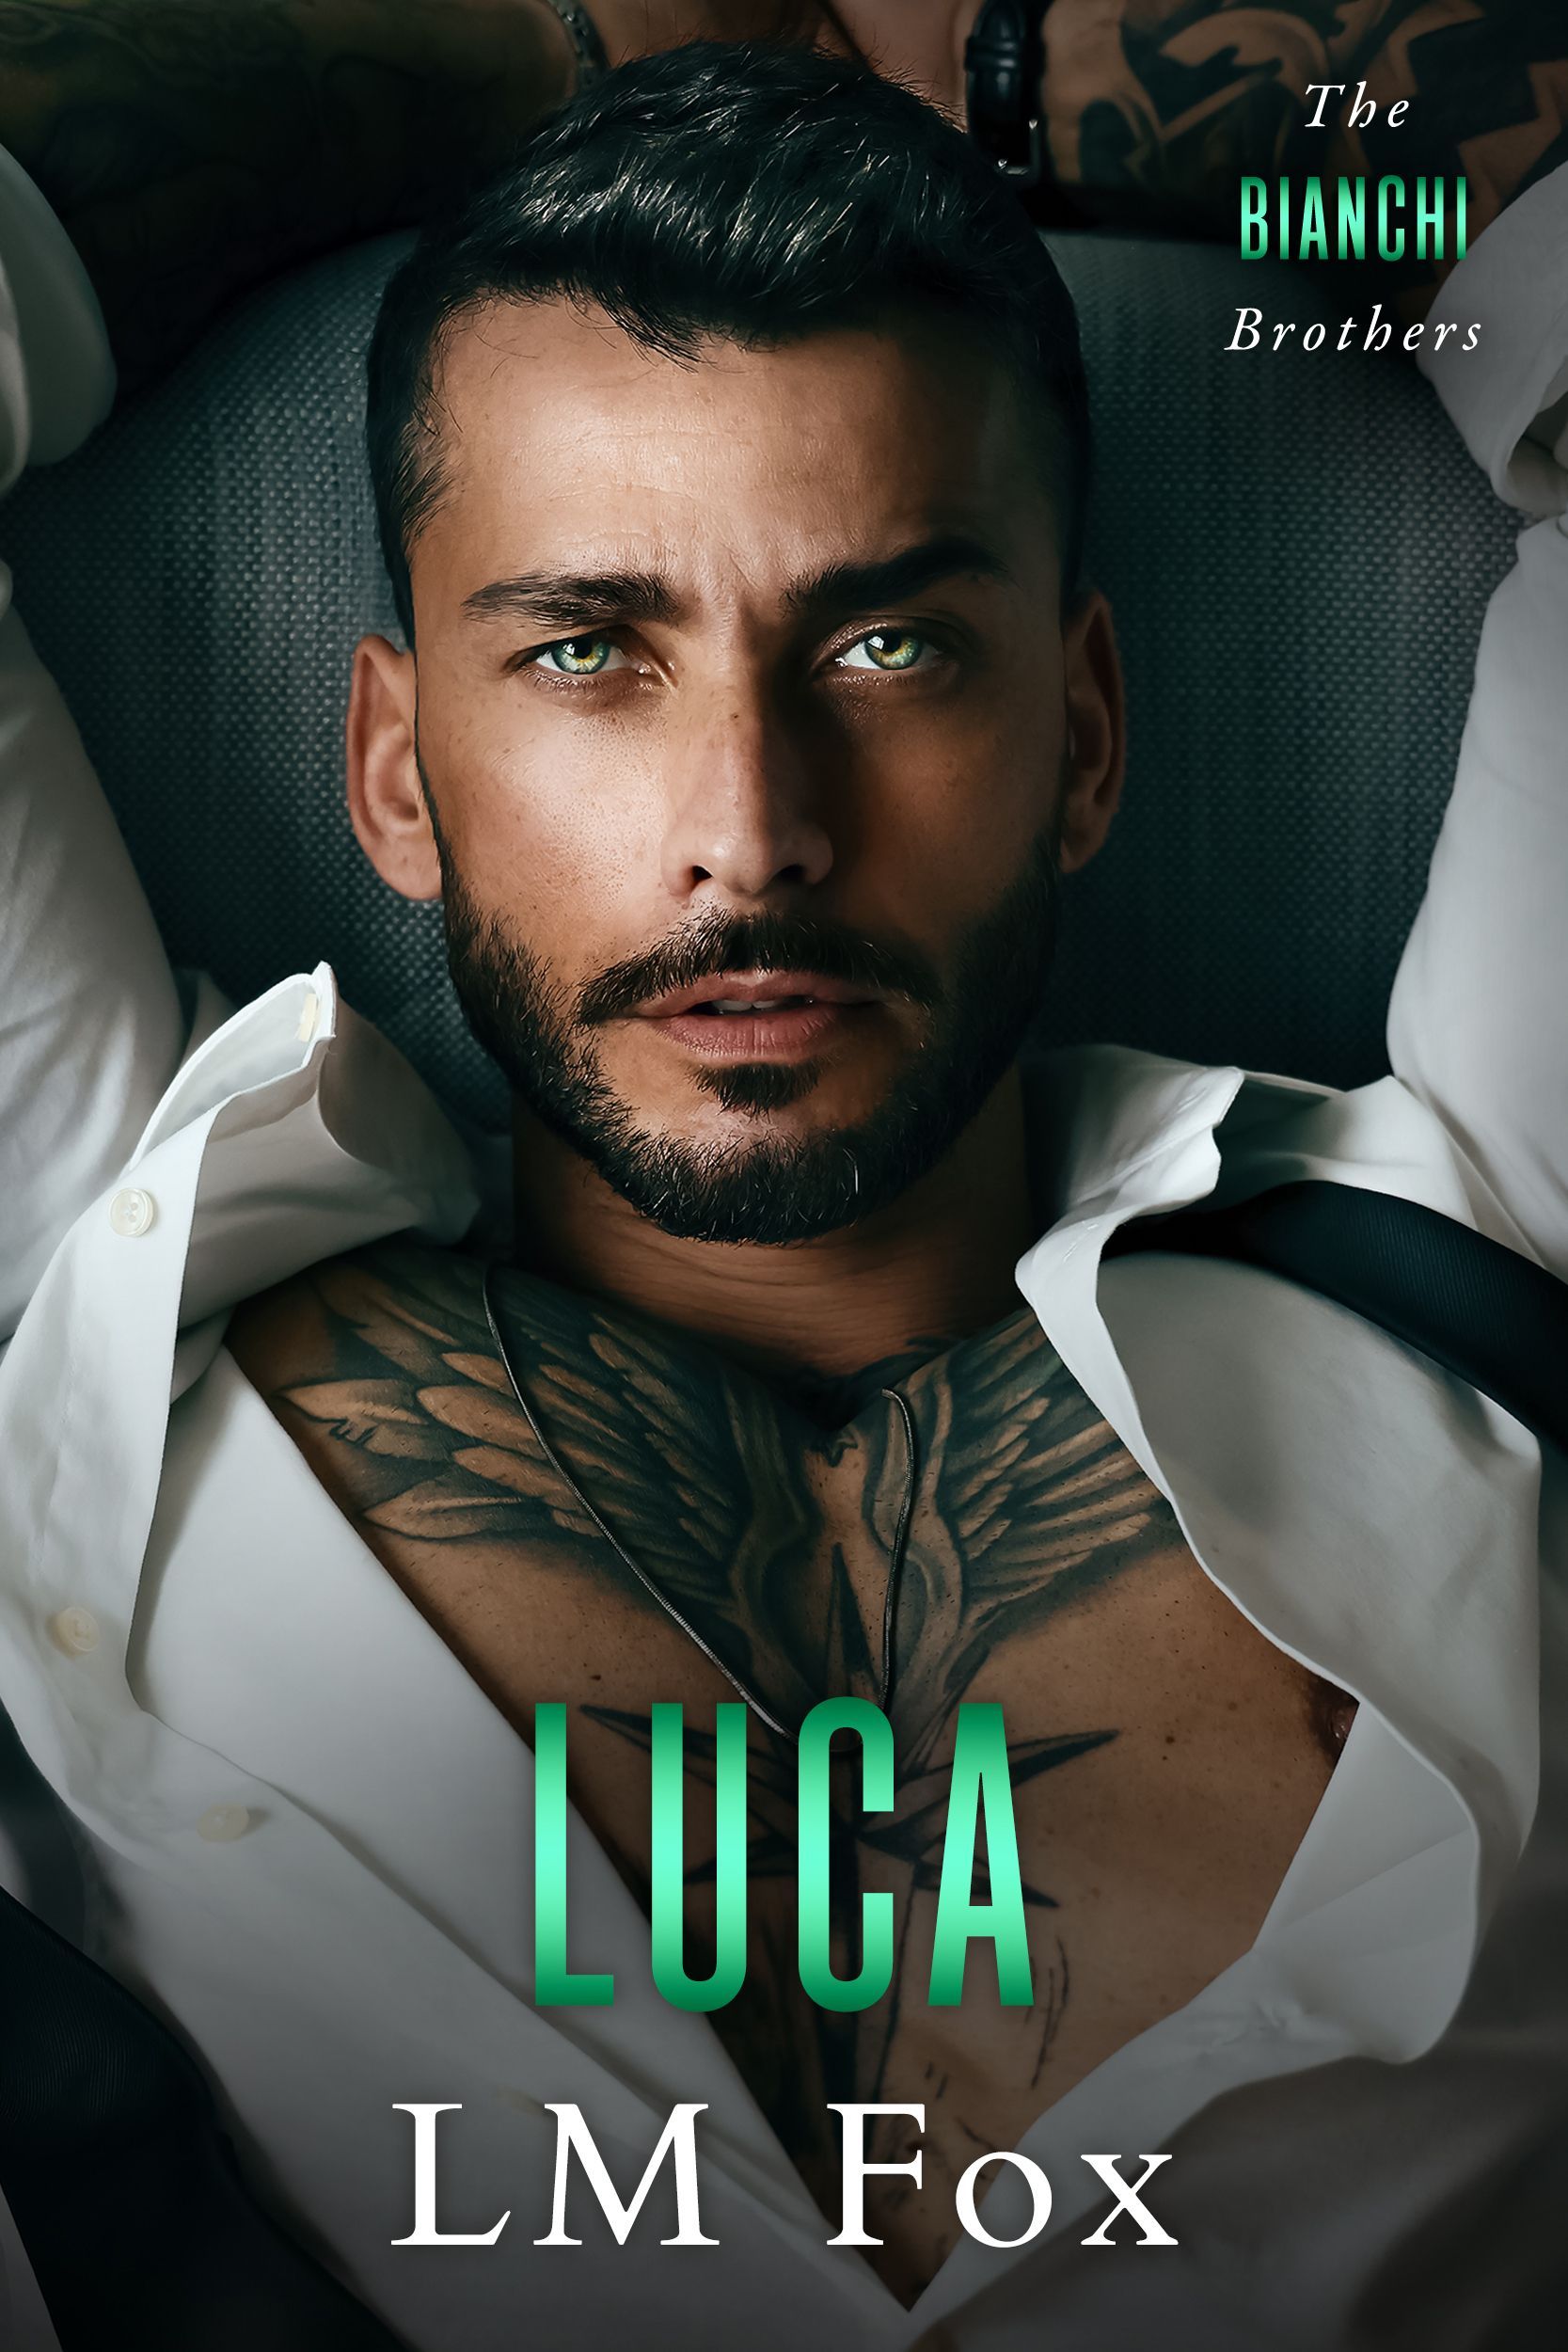 A man with a beard and tattoos is on the cover of luca by lm fox